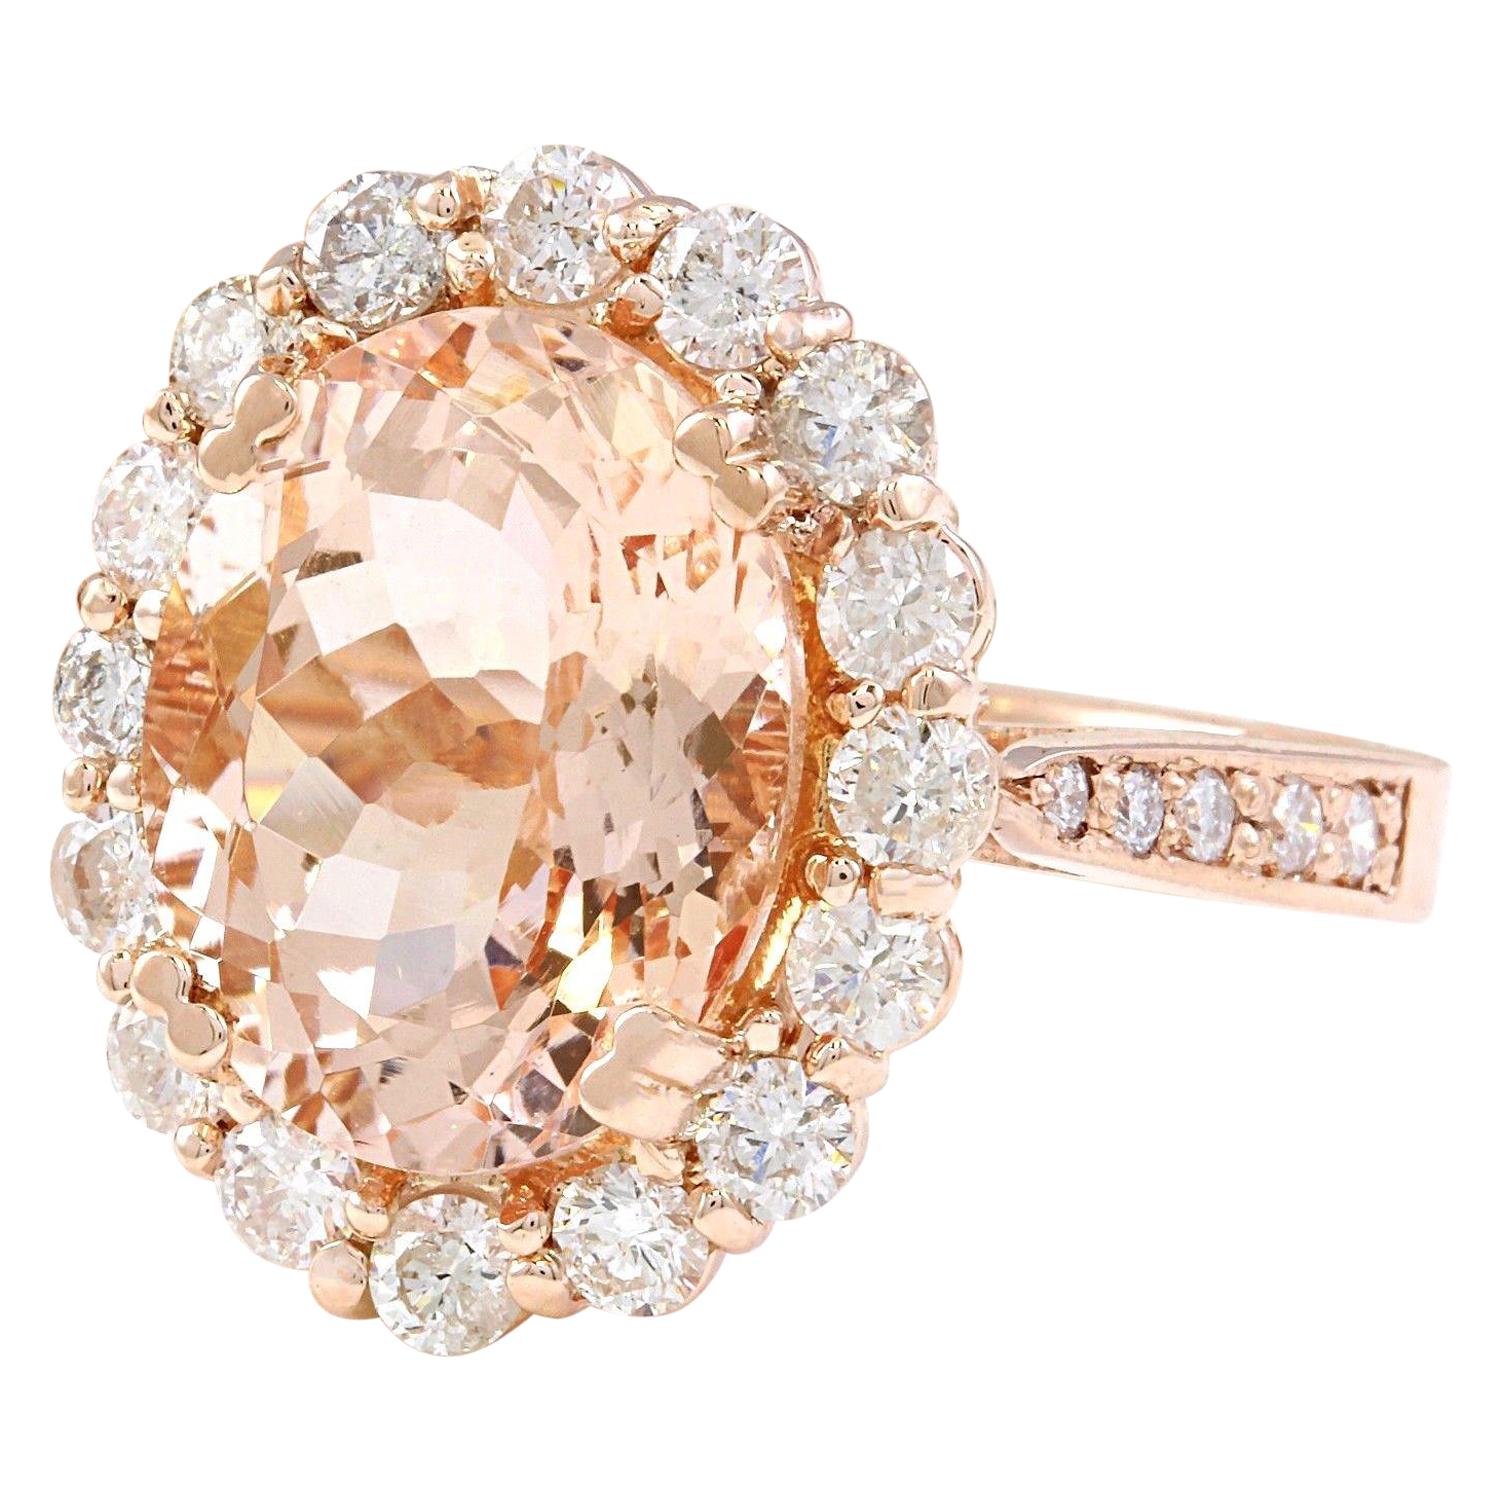 6.82 Carat Natural Morganite 14K Solid Rose Gold Diamond Ring
 Item Type: Ring
 Item Style: Cocktail
 Material: 14K Rose Gold
 Mainstone: Morganite
 Stone Color: Peach
 Stone Weight: 5.62 Carat
 Stone Shape: Oval
 Stone Quantity: 1
 Stone